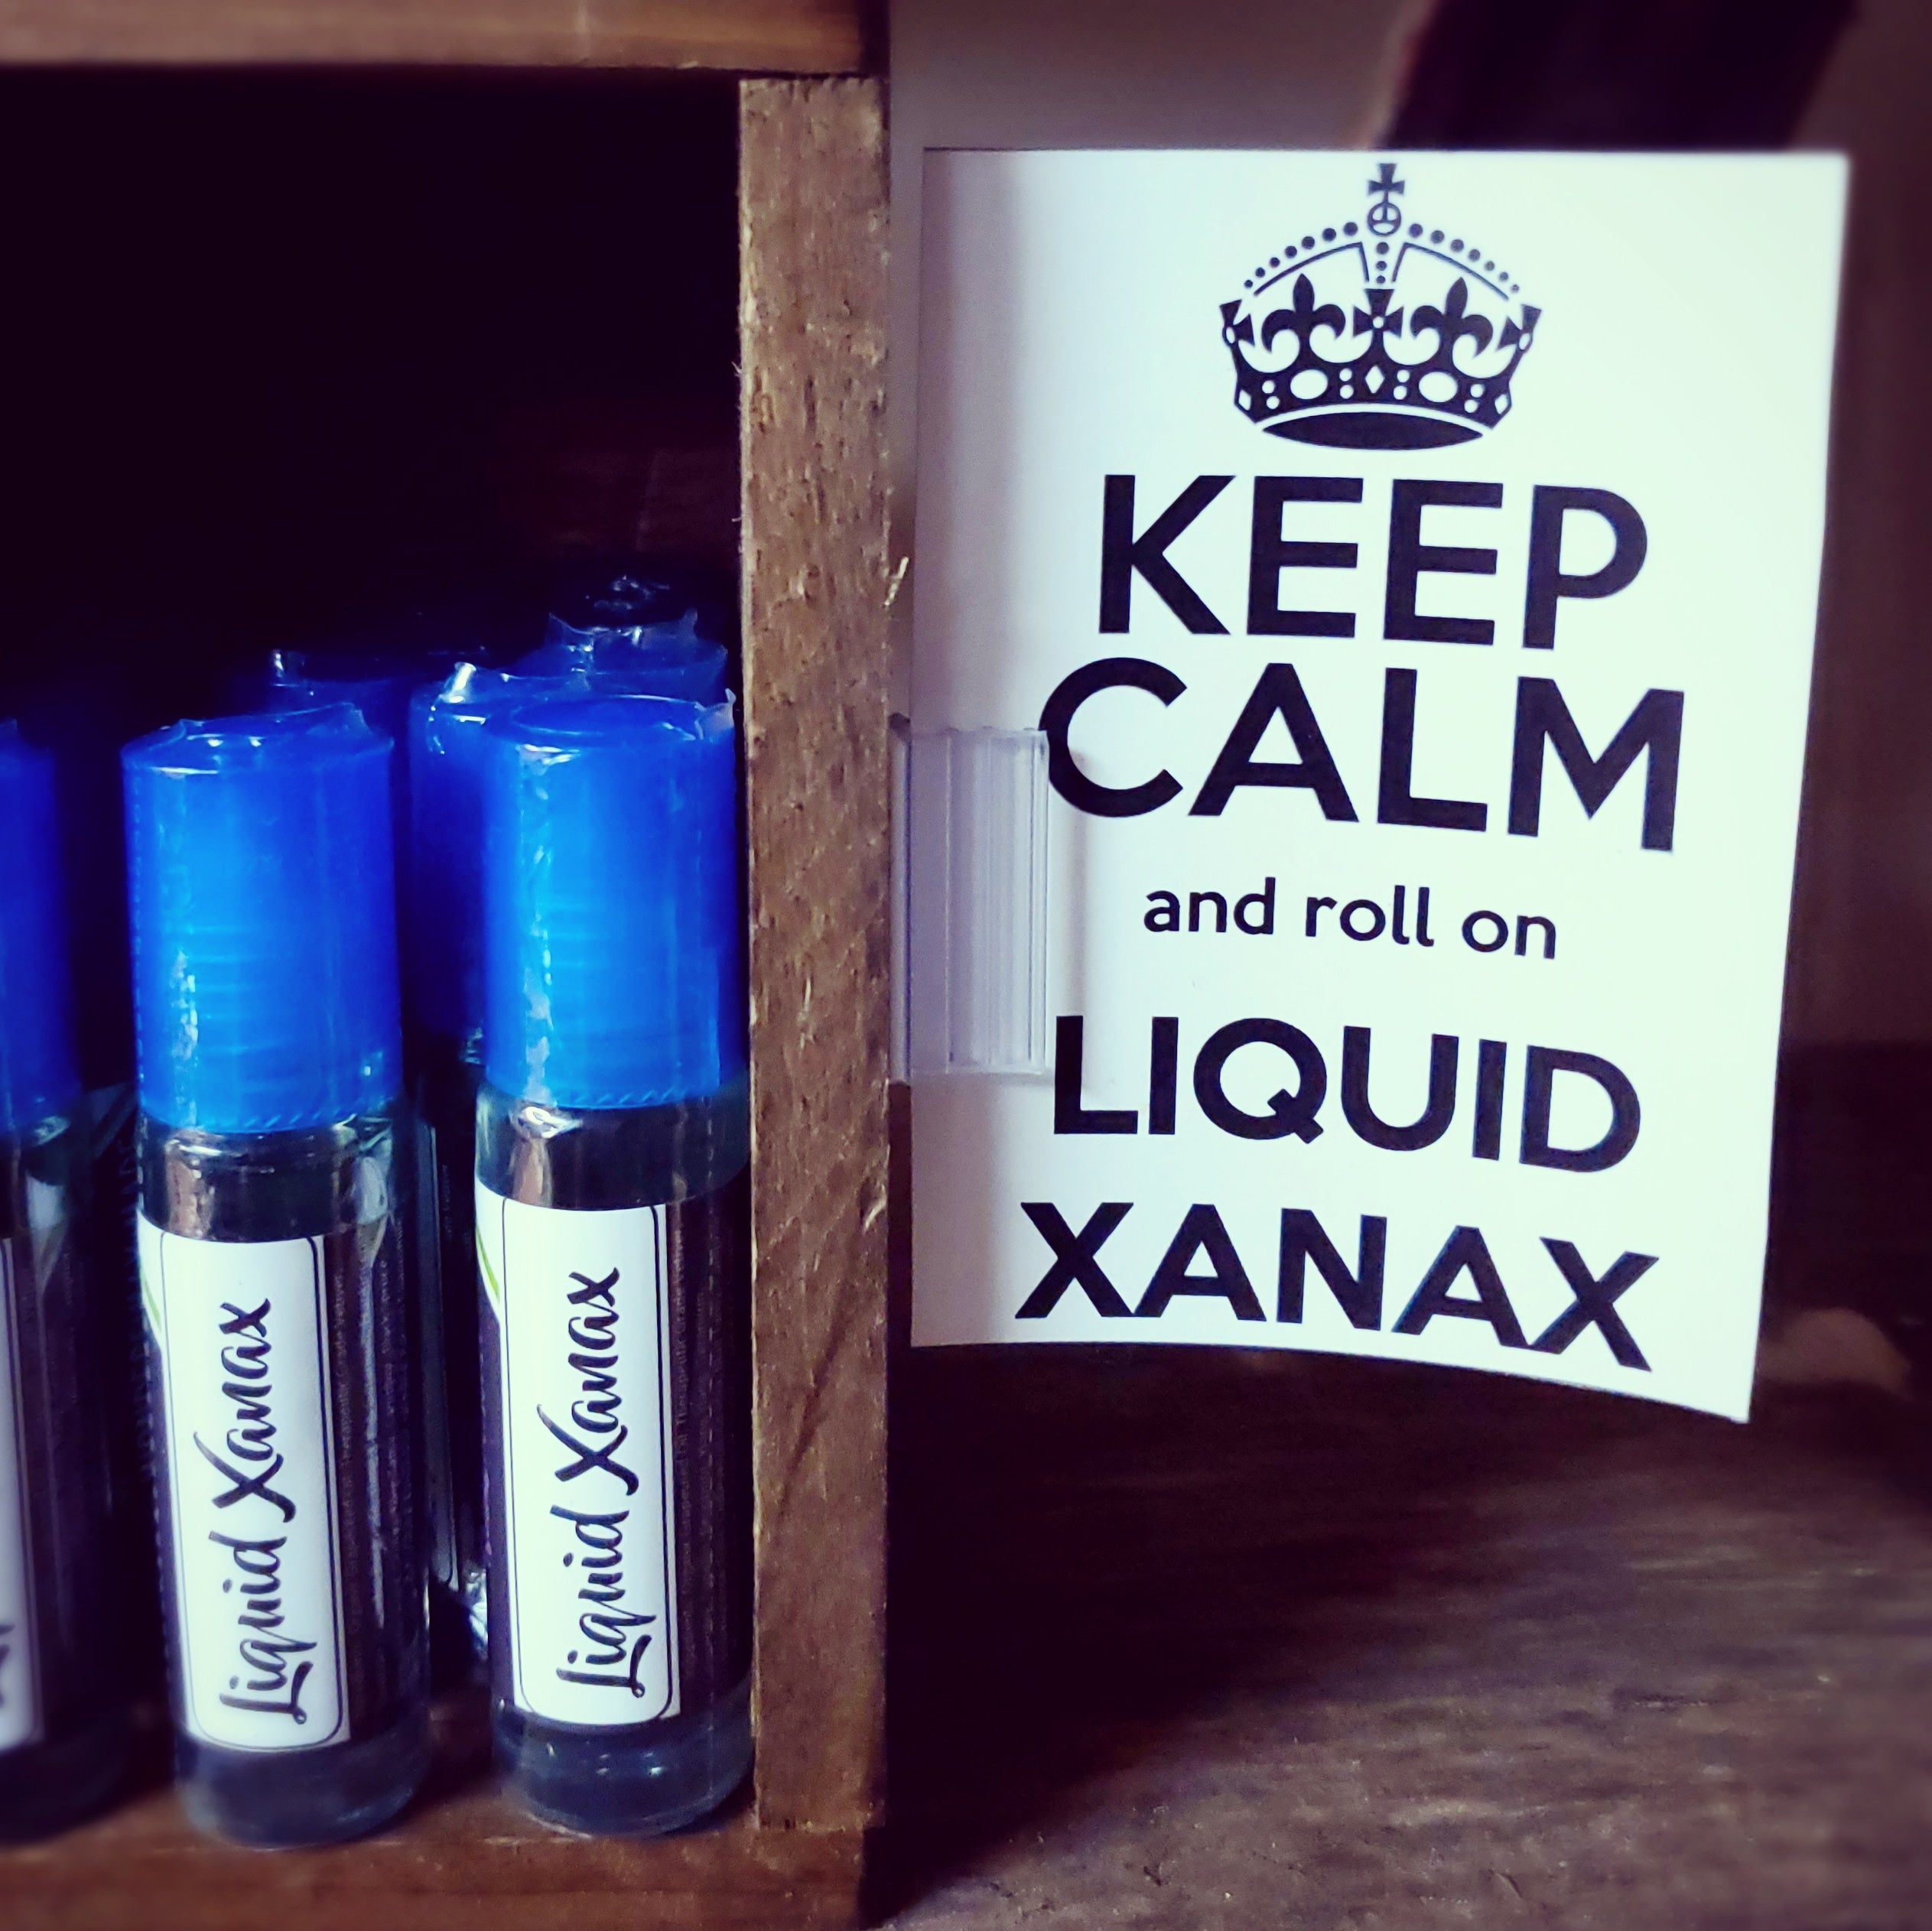 Liquid Xanax | Calm | Anxiety Panic Attack Natural Relief | Essential Oil Roll on Steel Ball Roller Bottle |  Calming Relaxing Organic |Woman Owned